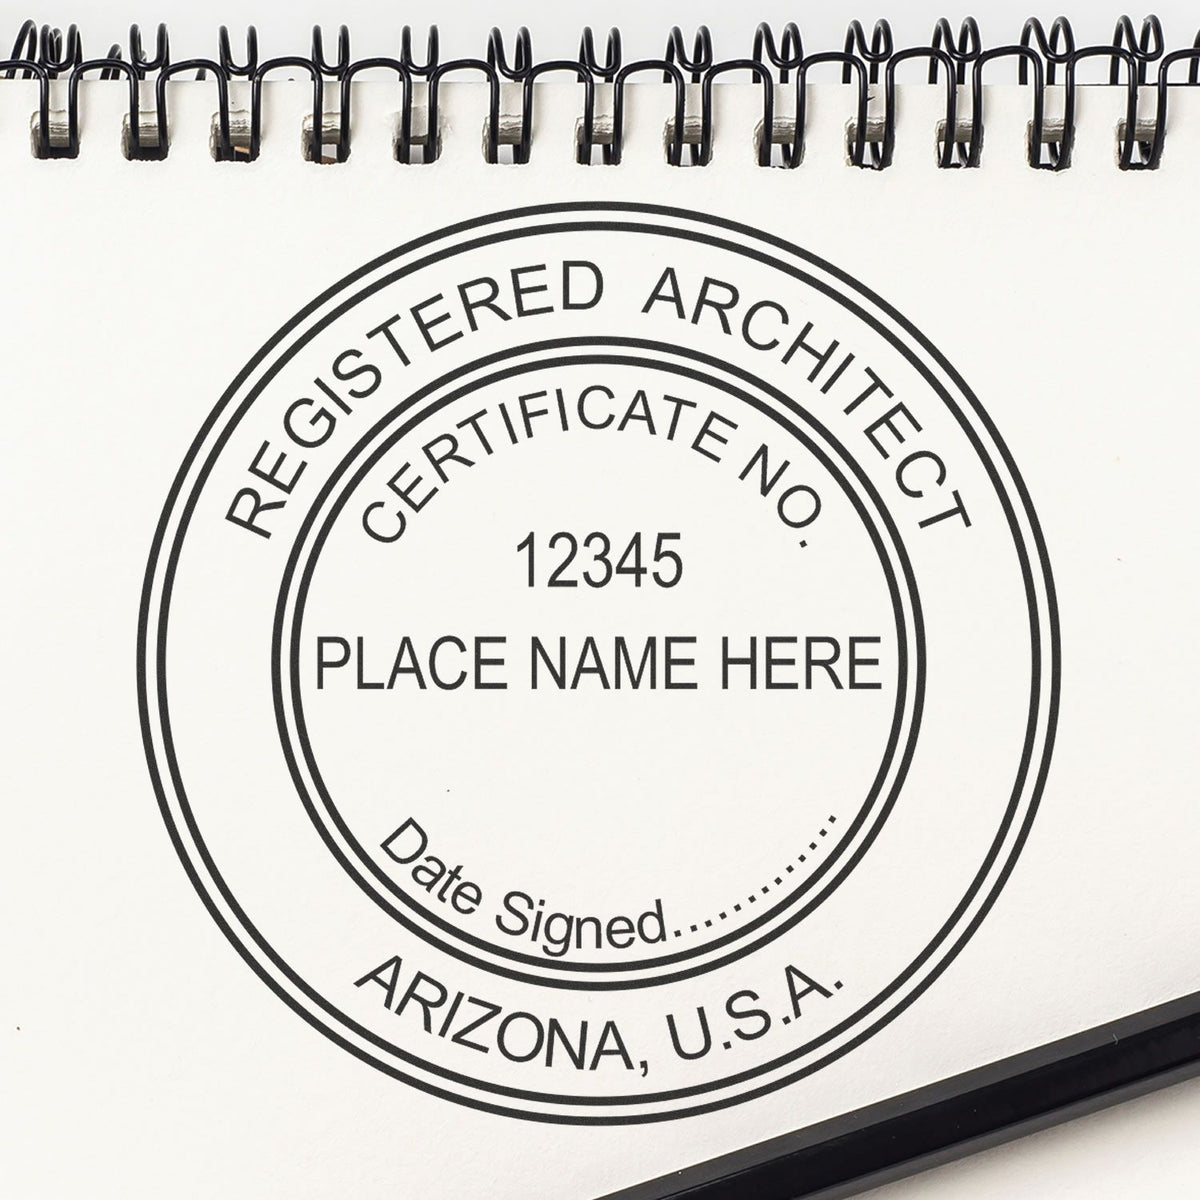 Slim Pre-Inked Arizona Architect Seal Stamp in use photo showing a stamped imprint of the Slim Pre-Inked Arizona Architect Seal Stamp